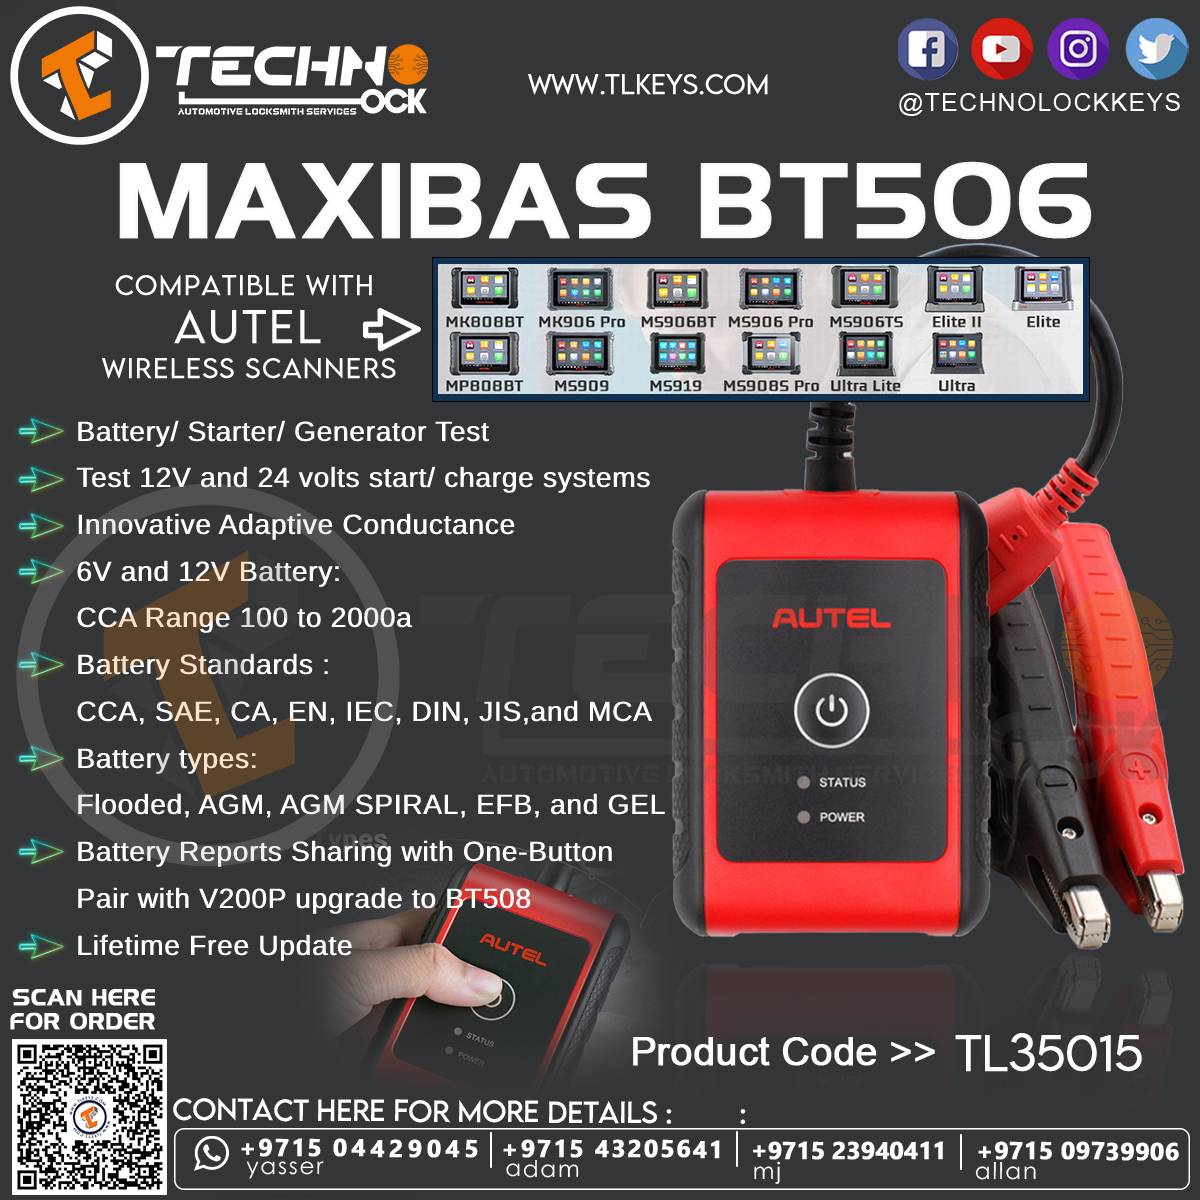  compatible with the latest models such as the Autel Maxisys MS906 Pro, MS906 Pro-TS, and MS Elite 2